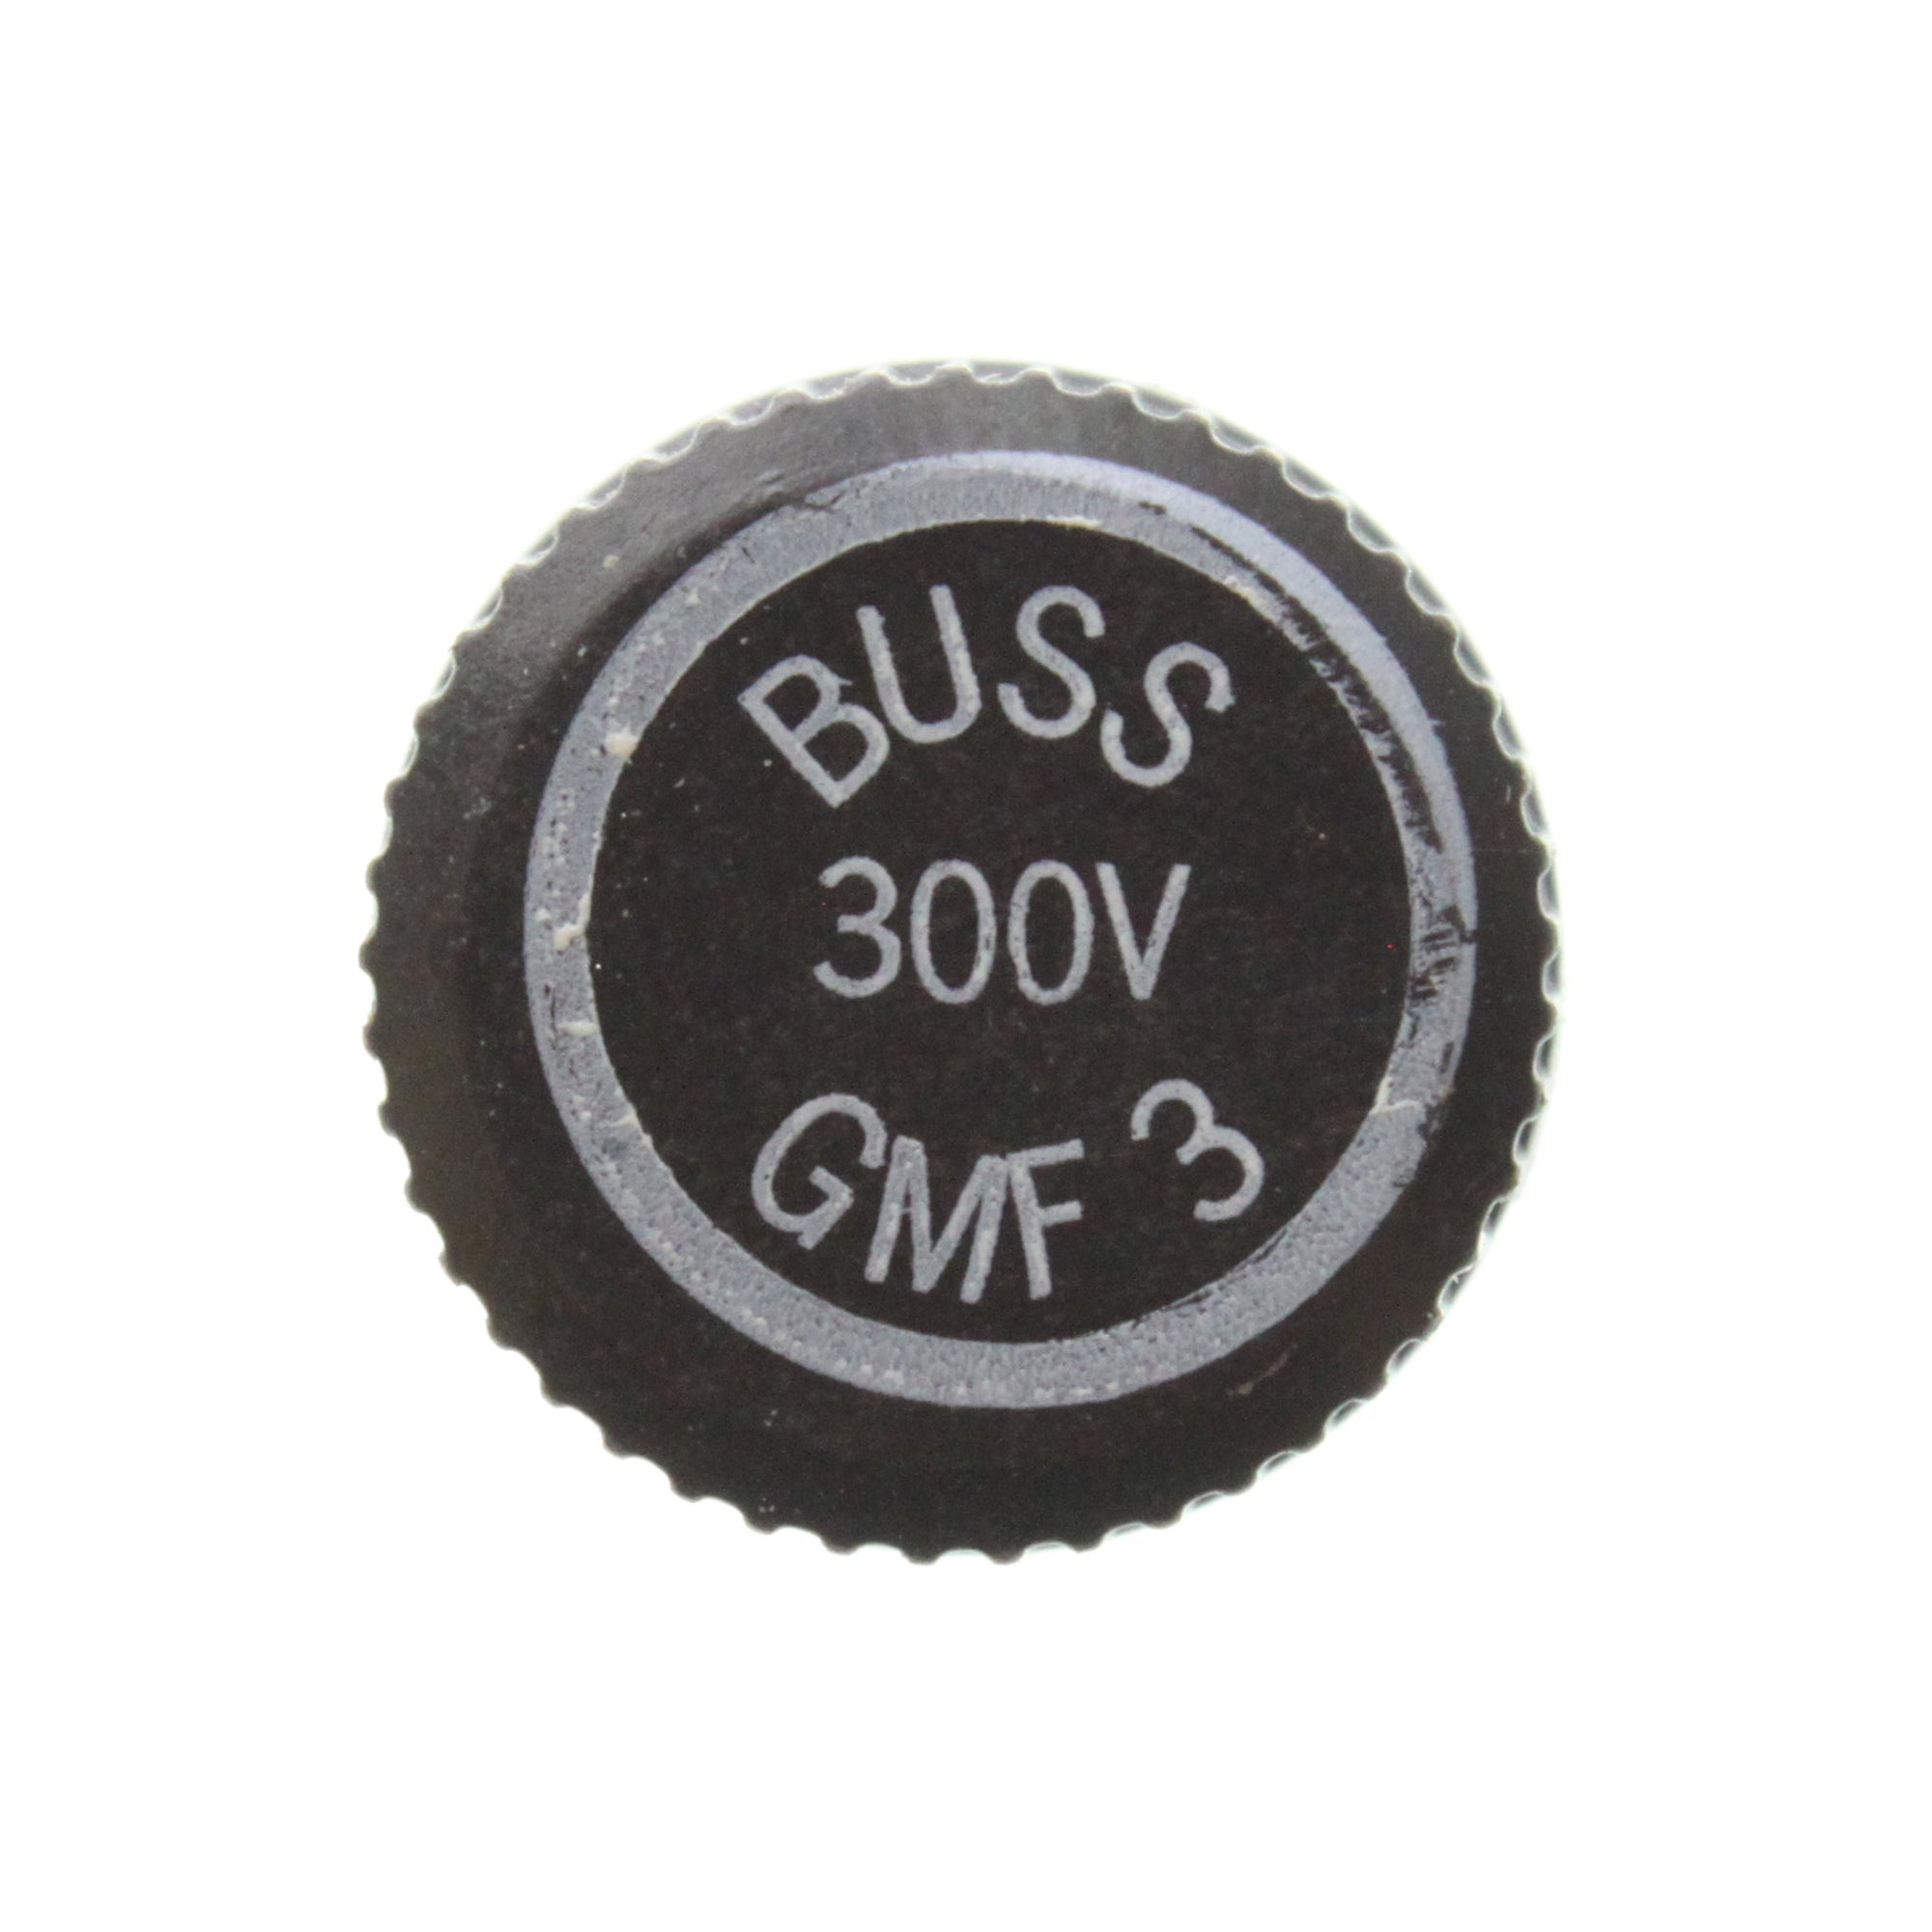 Bussman, BUSSMAN GMF-3 NON-REJECTING TIME-DELAY IN-LINE FUSE 300-VOLT, 3-AMP